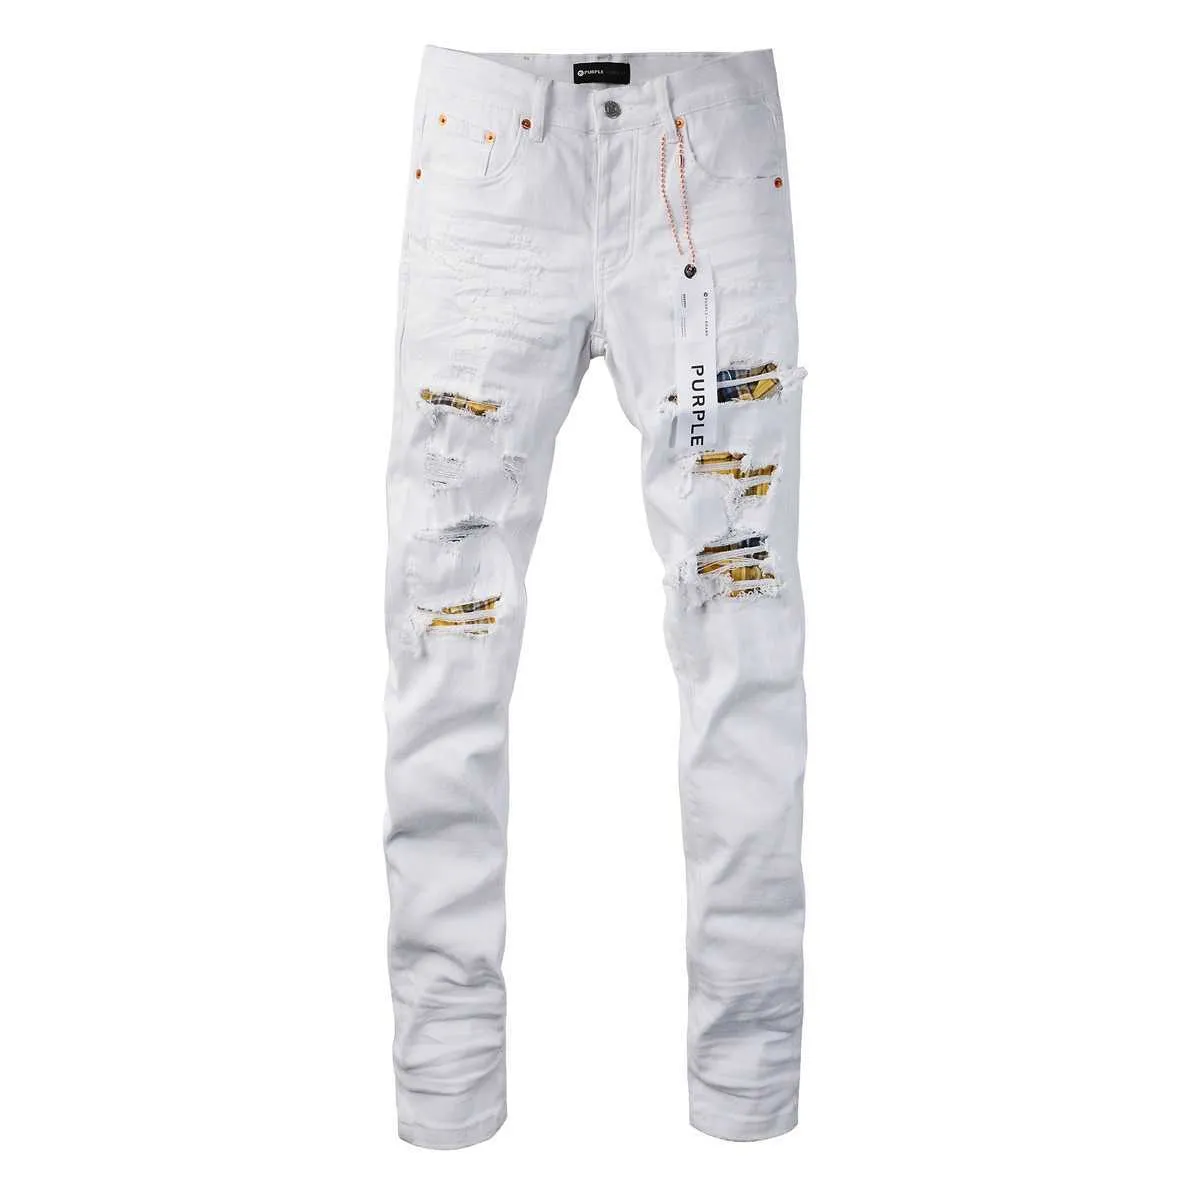 Mens Purple Brand Jeans American High Street White Patched Hole